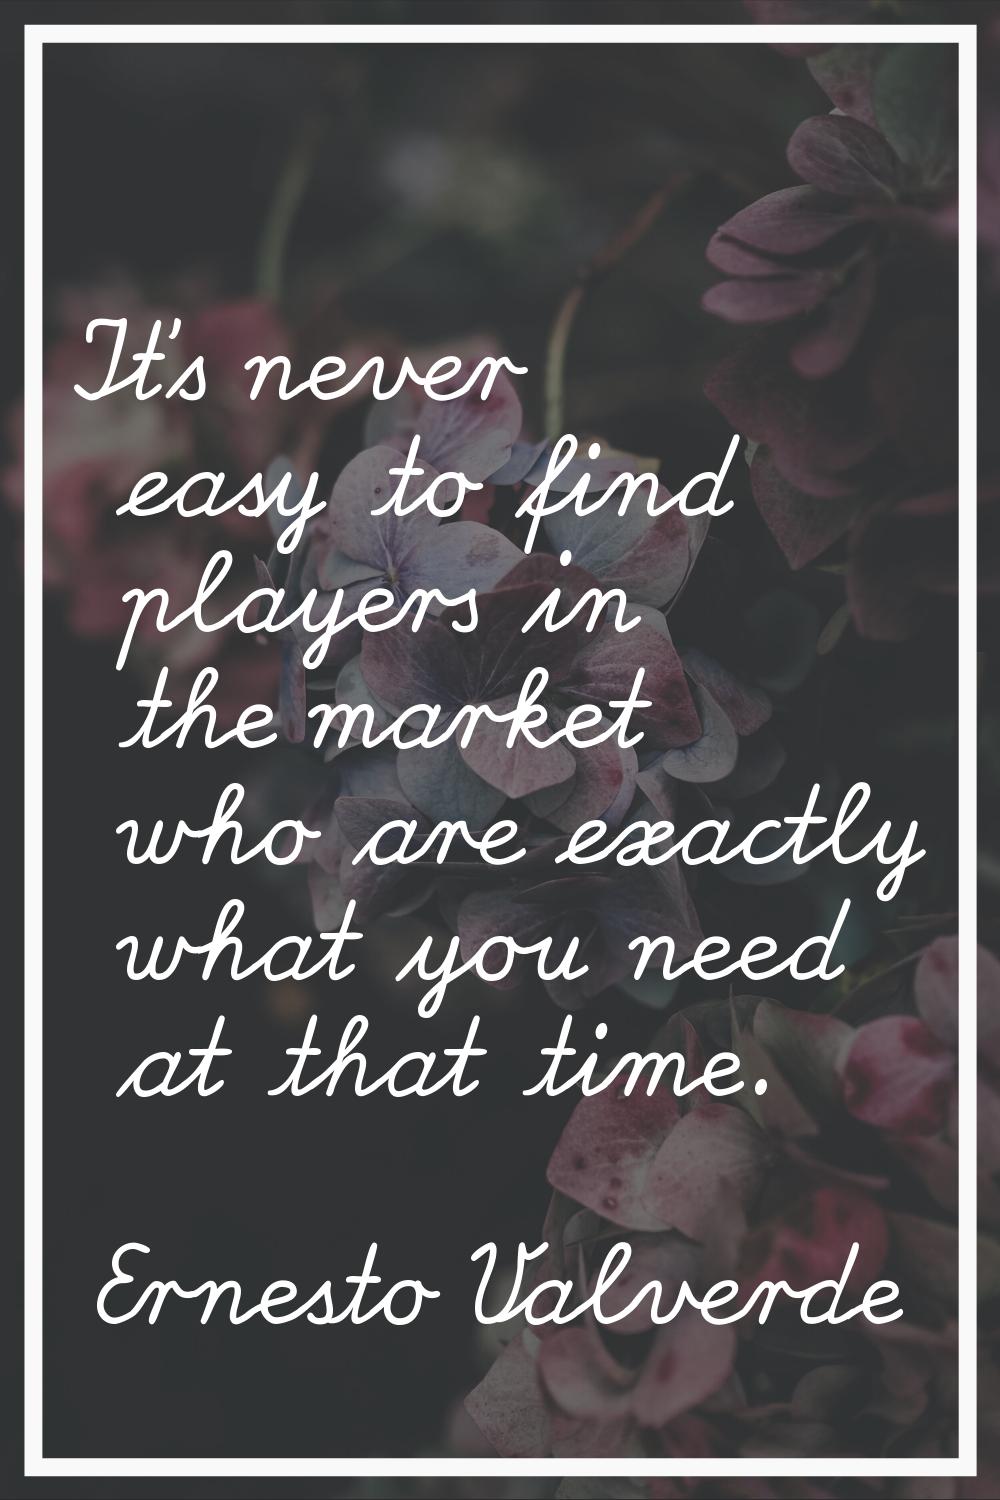 It's never easy to find players in the market who are exactly what you need at that time.